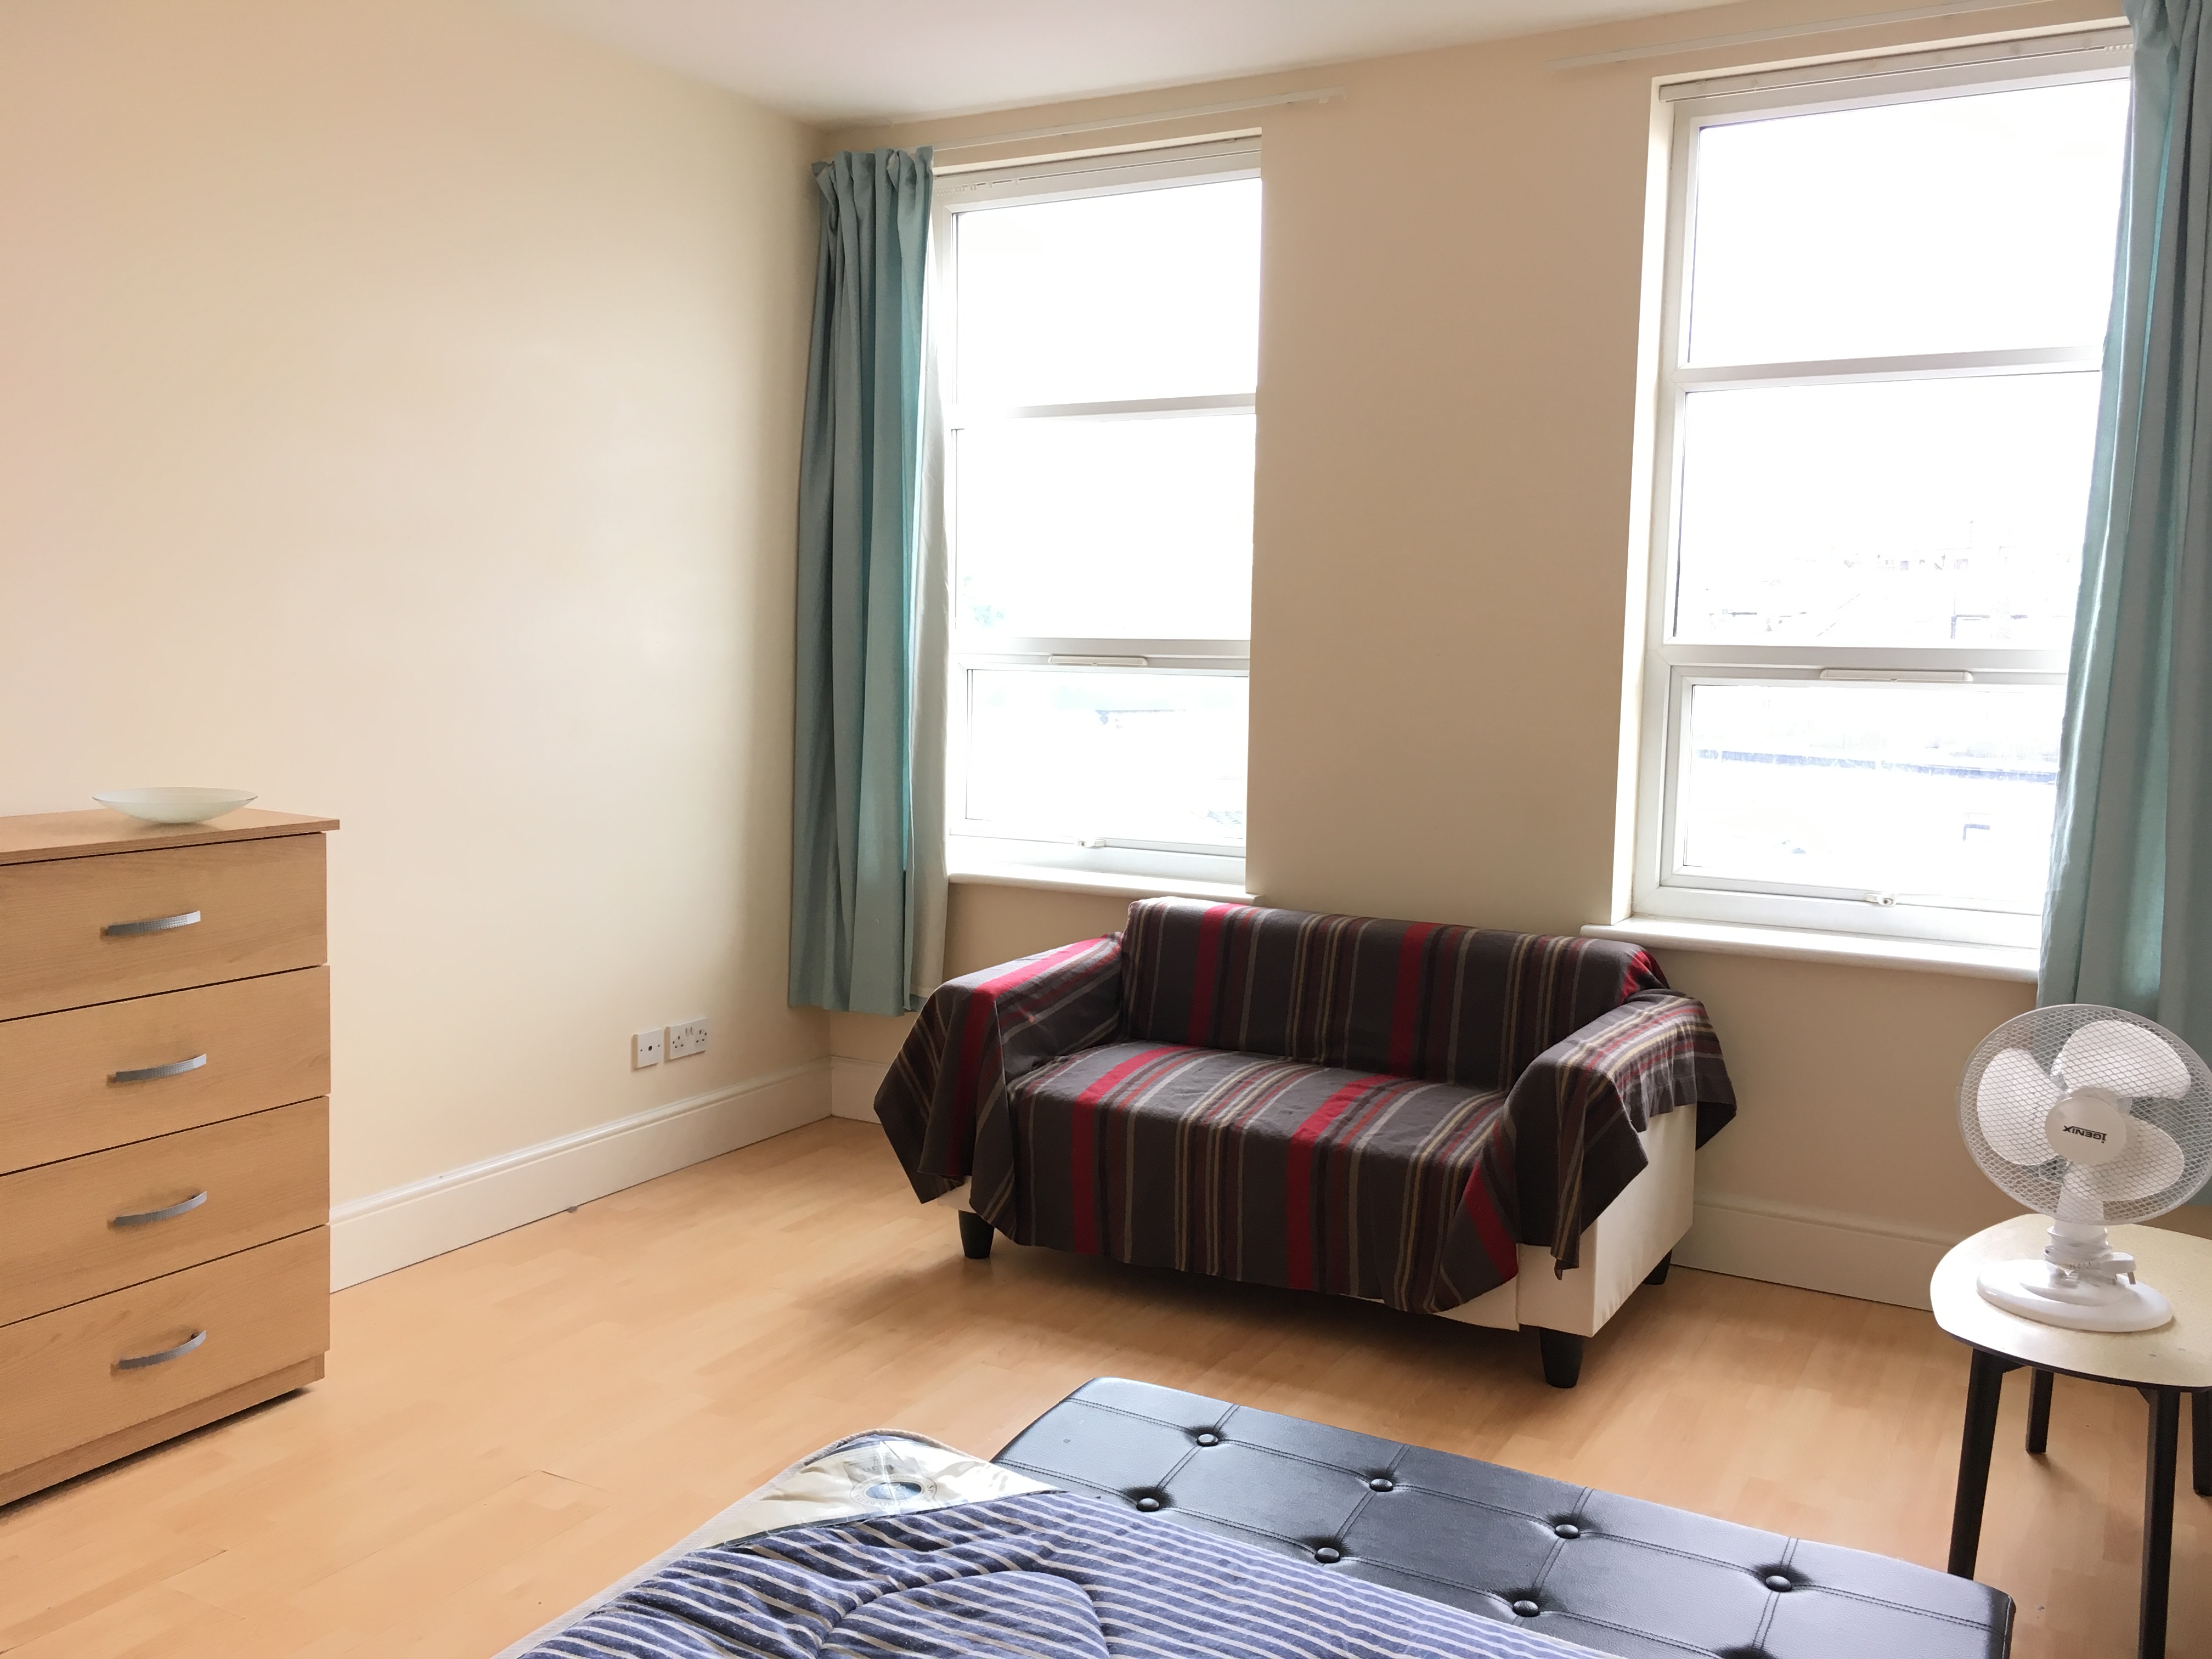 Spacious 2/3 bedroom flat in Upper Clapton E5.